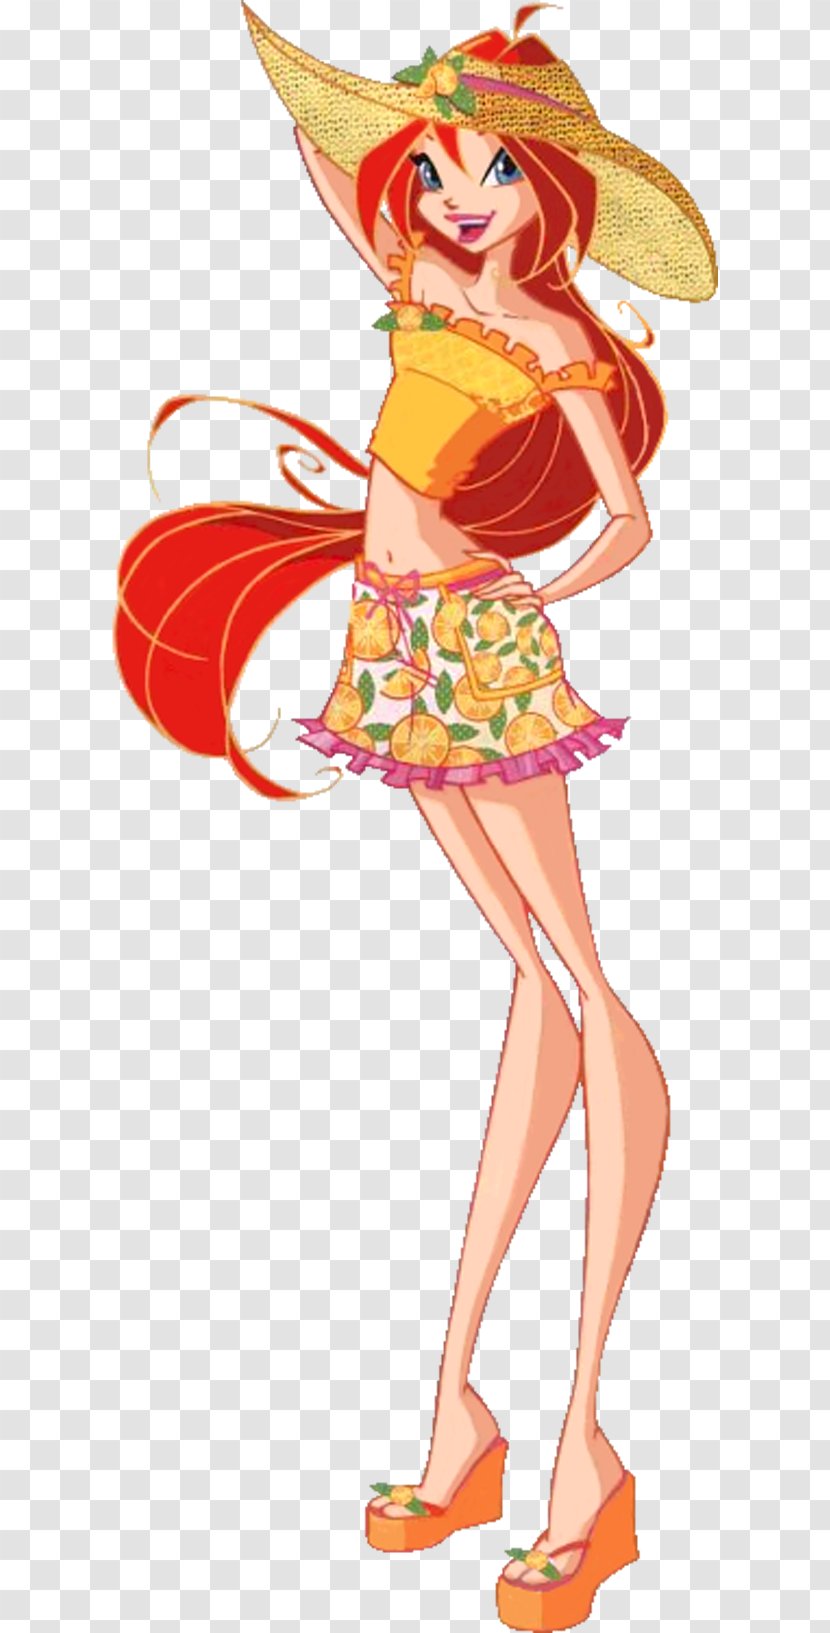 Bloom Roxy - Flower - Fictional Character Transparent PNG